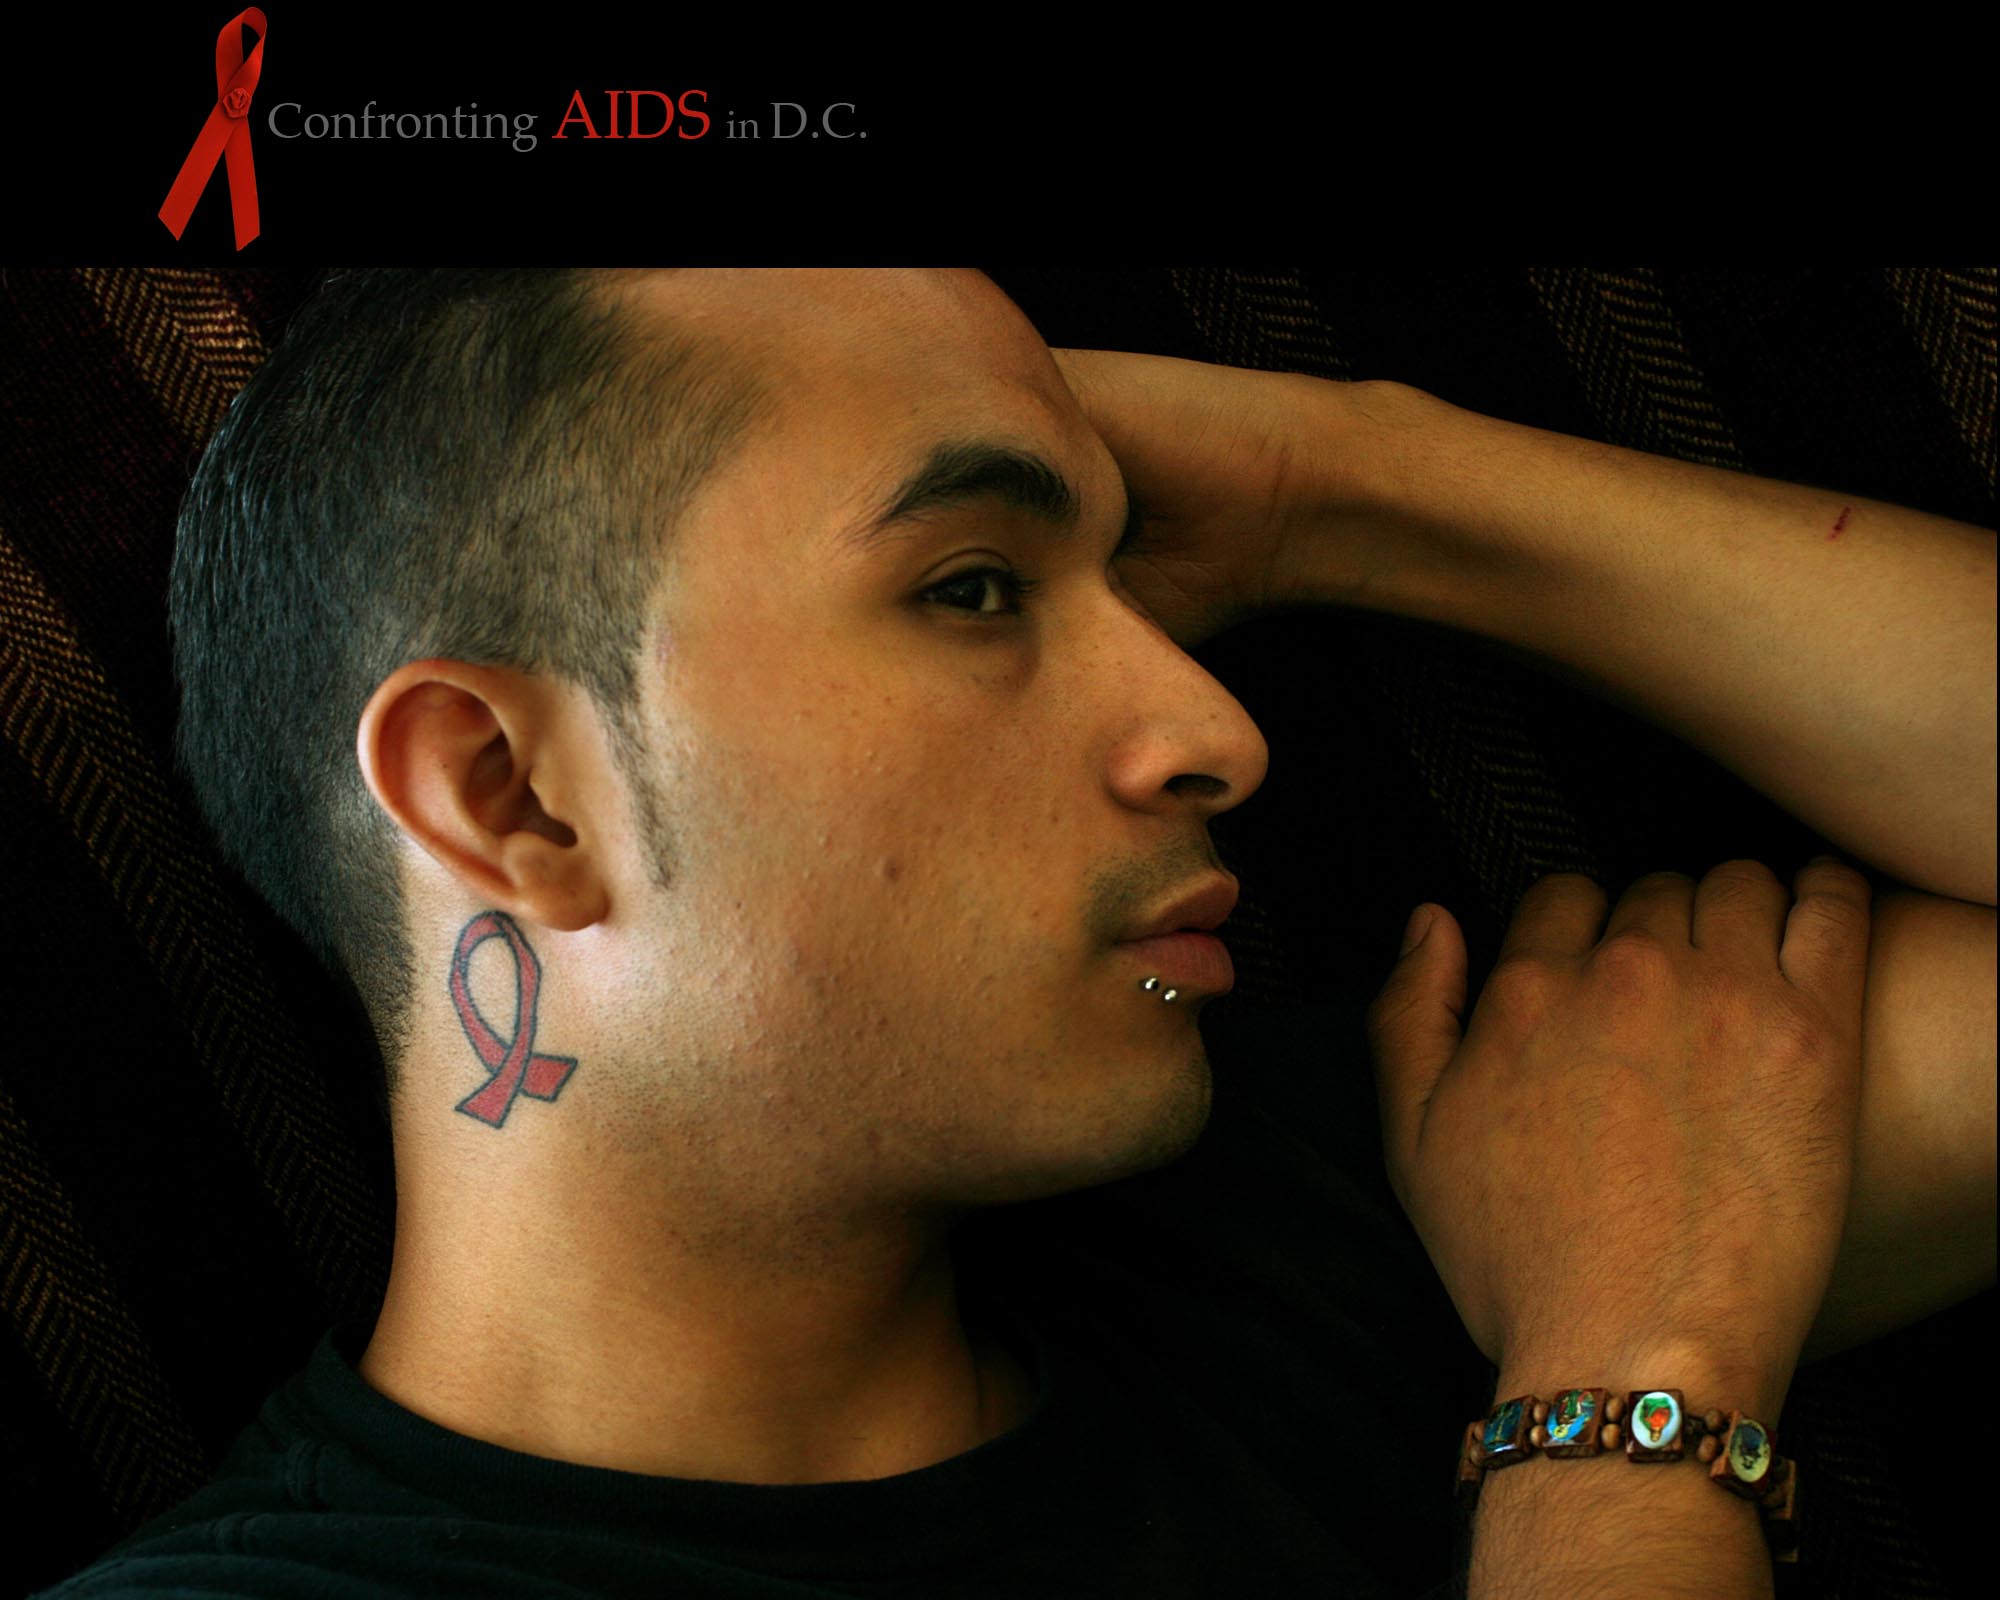 where about 1 in 20 residents is infectedA RED RIBBON ­ symbol of the fight against AIDS ­ is tattooed on José Ramirez's neck and posted prominently on the bulletin board in his office. {quote}It's me; it's who I am,{quote} says Ramirez, 26, coordinator of the Youth Mpowerment programs at D.C.'s Clinica del Pueblo. {quote}It opens up conversations.{quote}Ramirez, who educates young gay and bisexual Latino men about AIDS prevention, is working to slow the increase in cases. A recent Kaiser FamilyFoundation survey found that Hispanics in the District have the highest rate of new AIDS cases in the country, about 110 per 100,000 people. {quote}It really does change your life,{quote} says Ramirez who learned of his HIV-positive status as a 17-year-old high school student in Durham, N.C. {quote}I haven't cried about it, yet. I want to be strong about it. I think that's what helps me.{quote}ALL RIGHTS RESERVED ©2008 Nikki Kahn